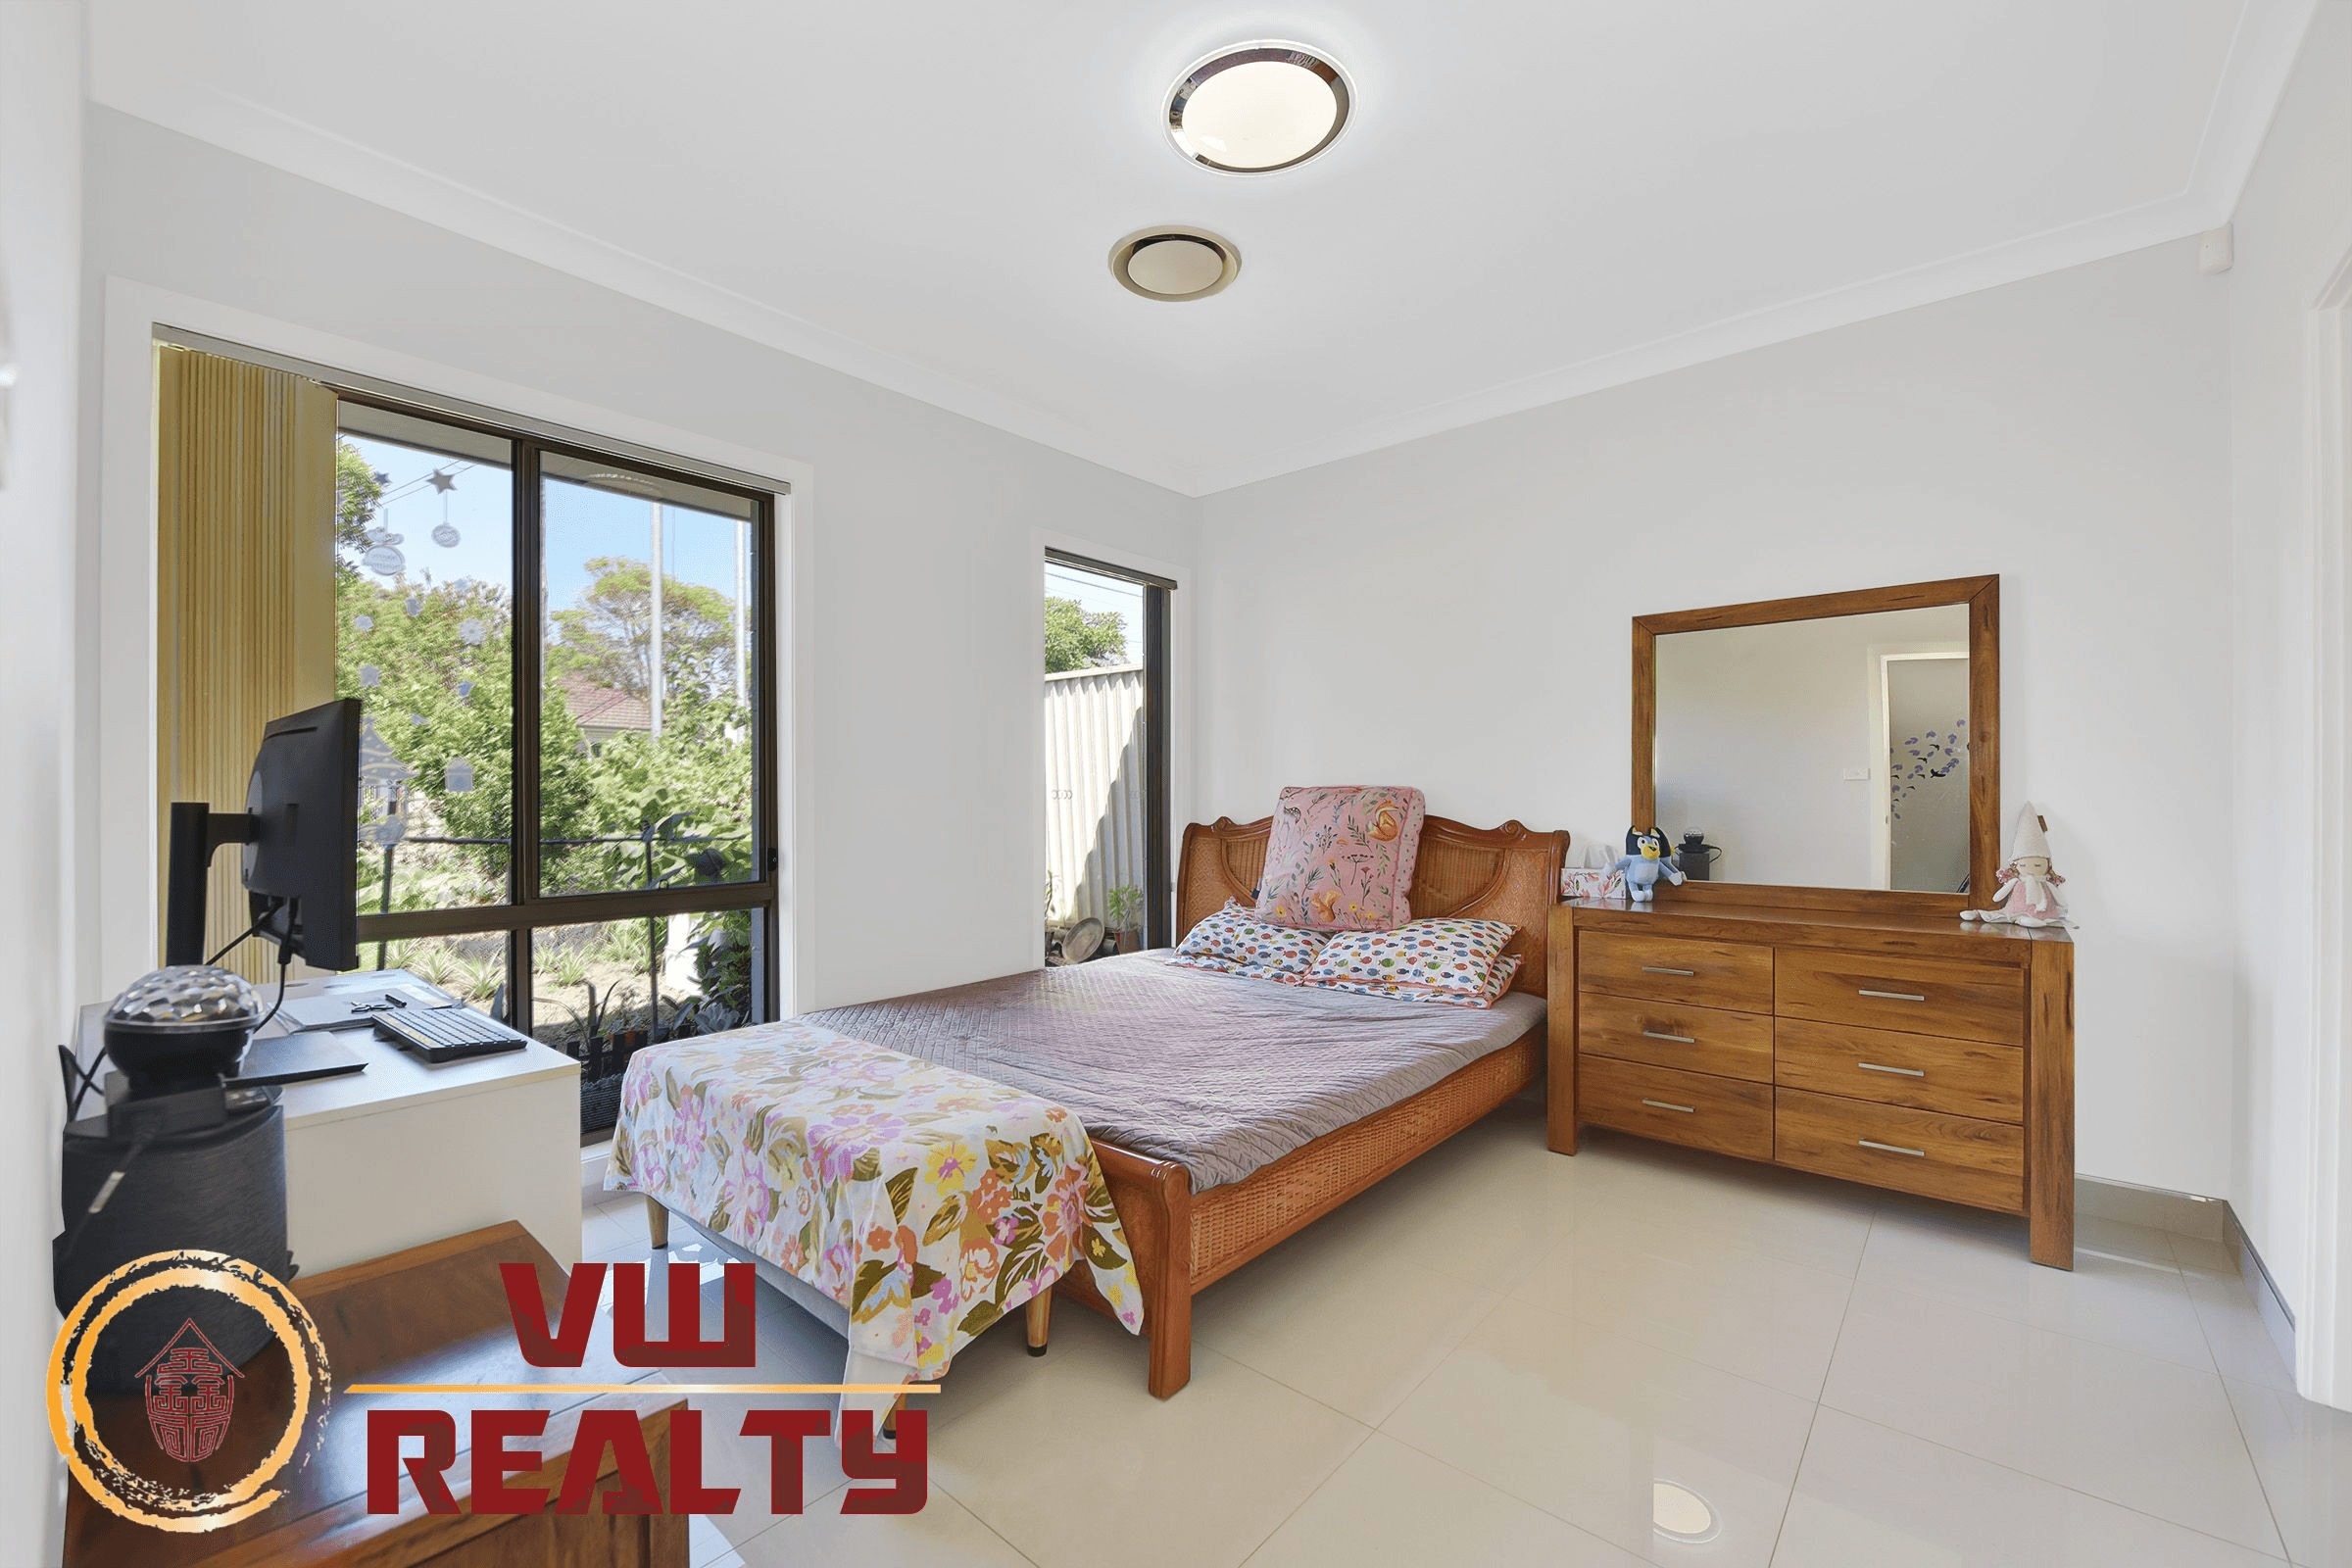 32 Delamere Street, CANLEY VALE, NSW 2166